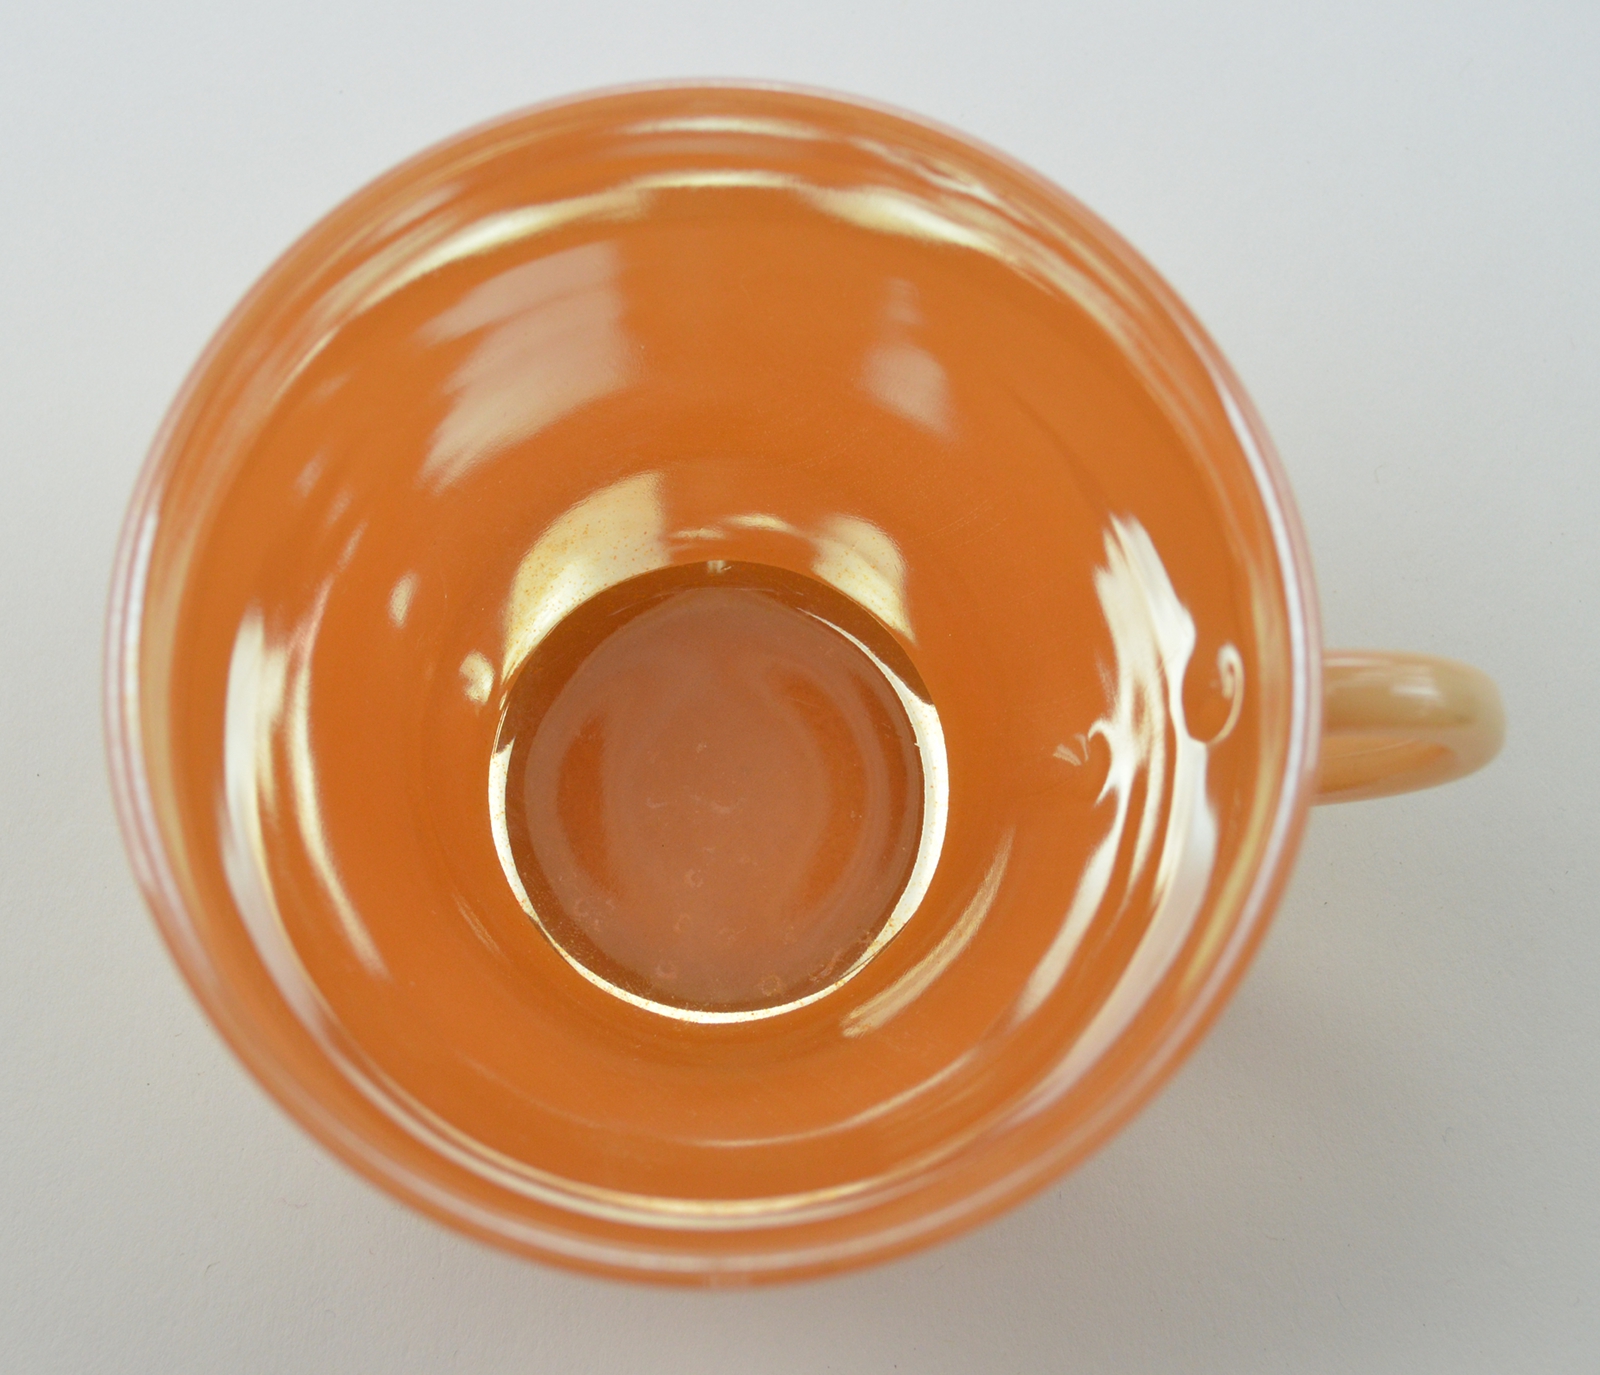 Tea Cup 8 oz. Fire King Peach Lustre Oven Ware Three Bands Coffee 